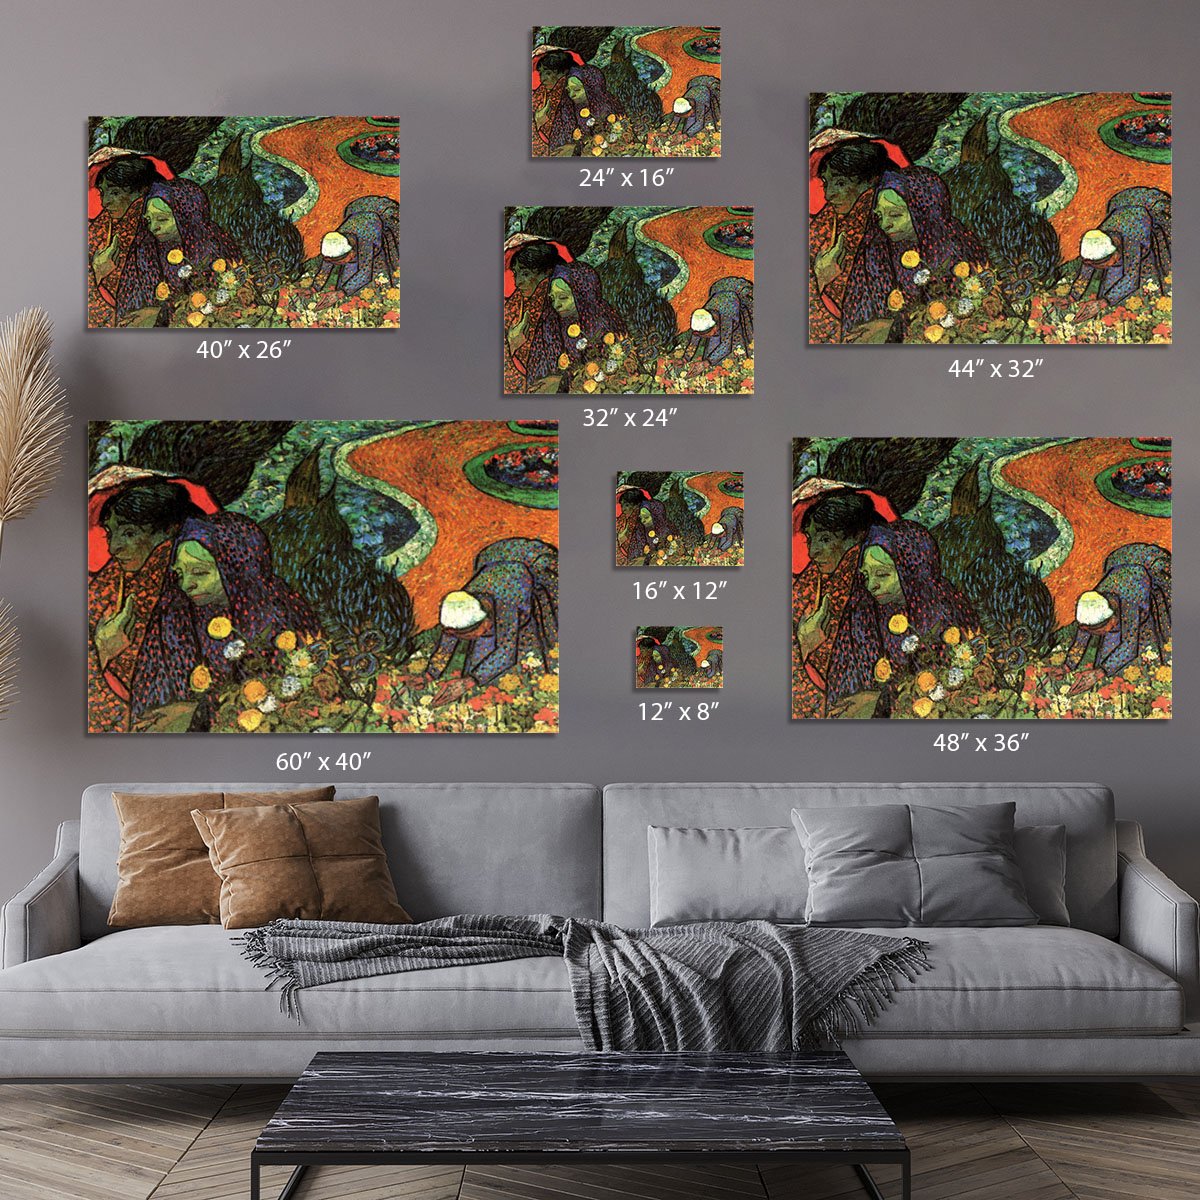 Memory of the Garden at Etten by Van Gogh Canvas Print or Poster